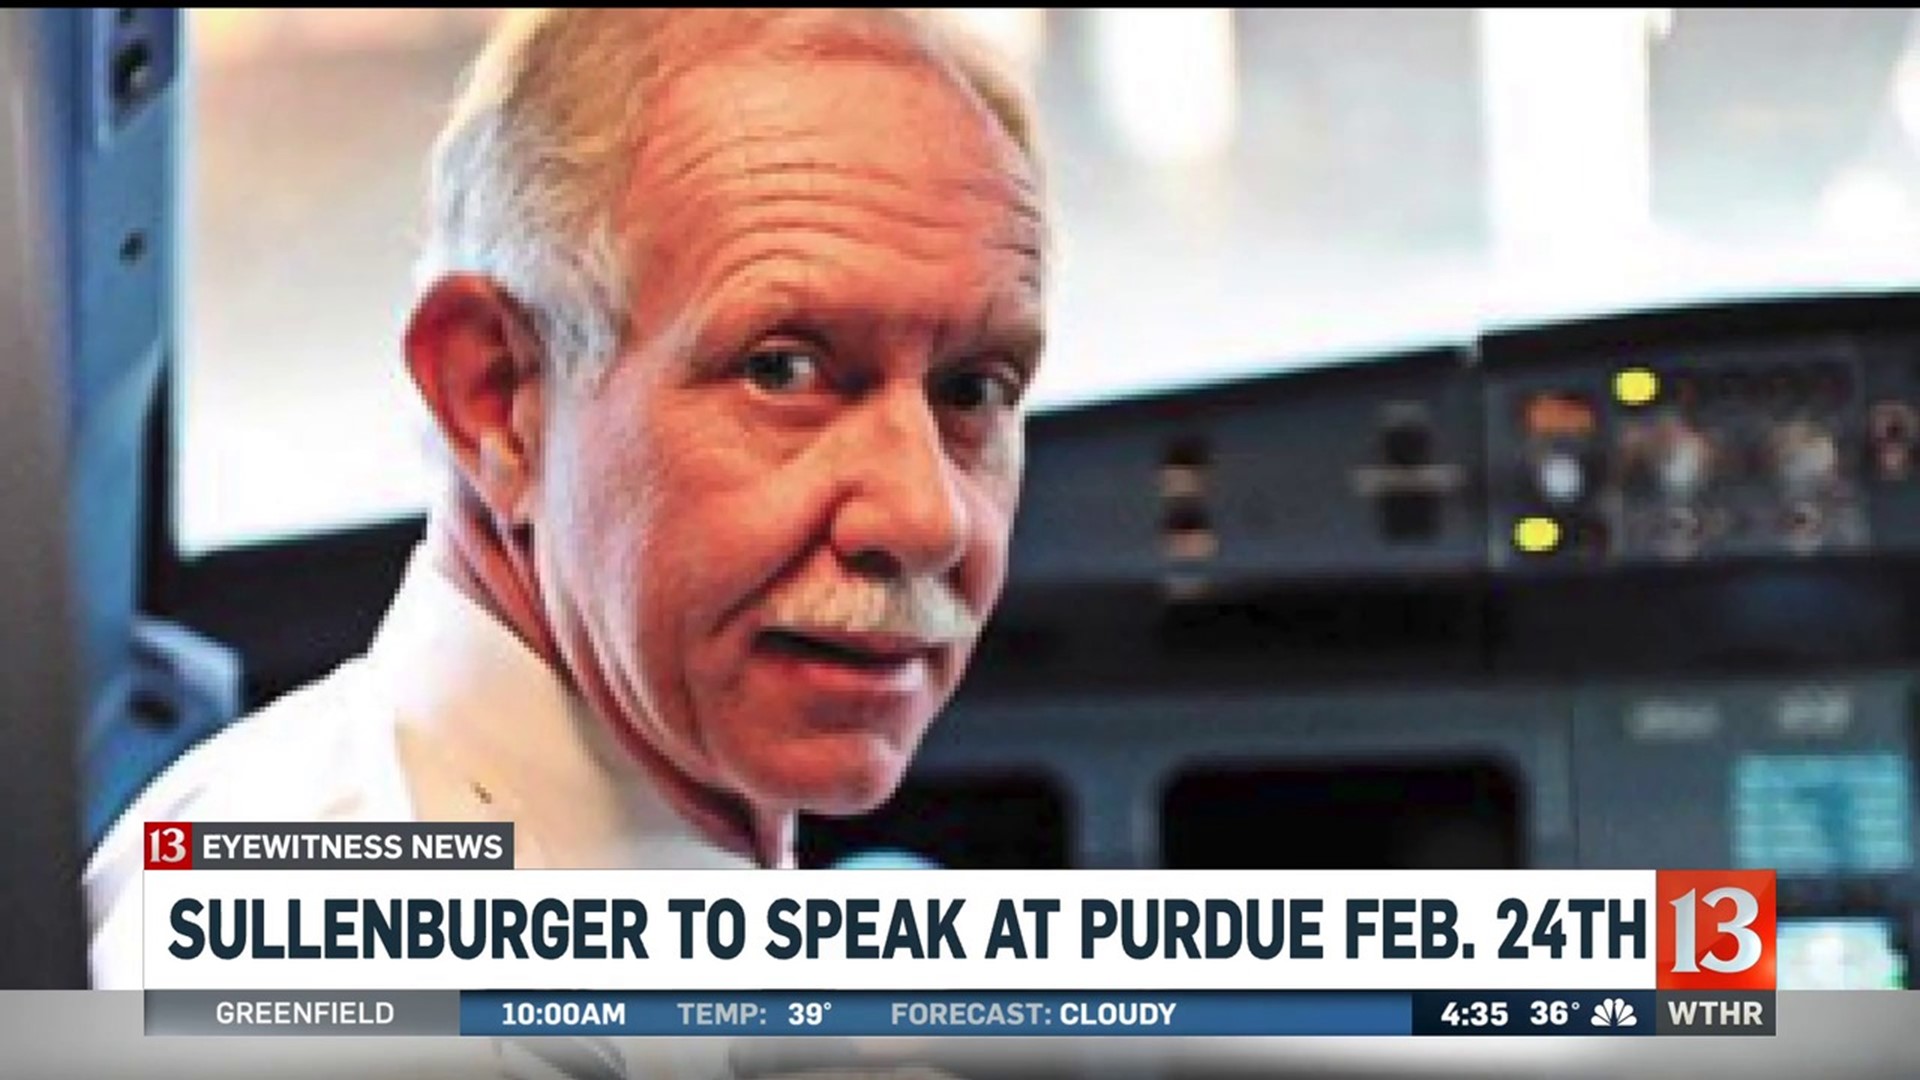 Capt. Sully Sullenberger to speak at Purdue